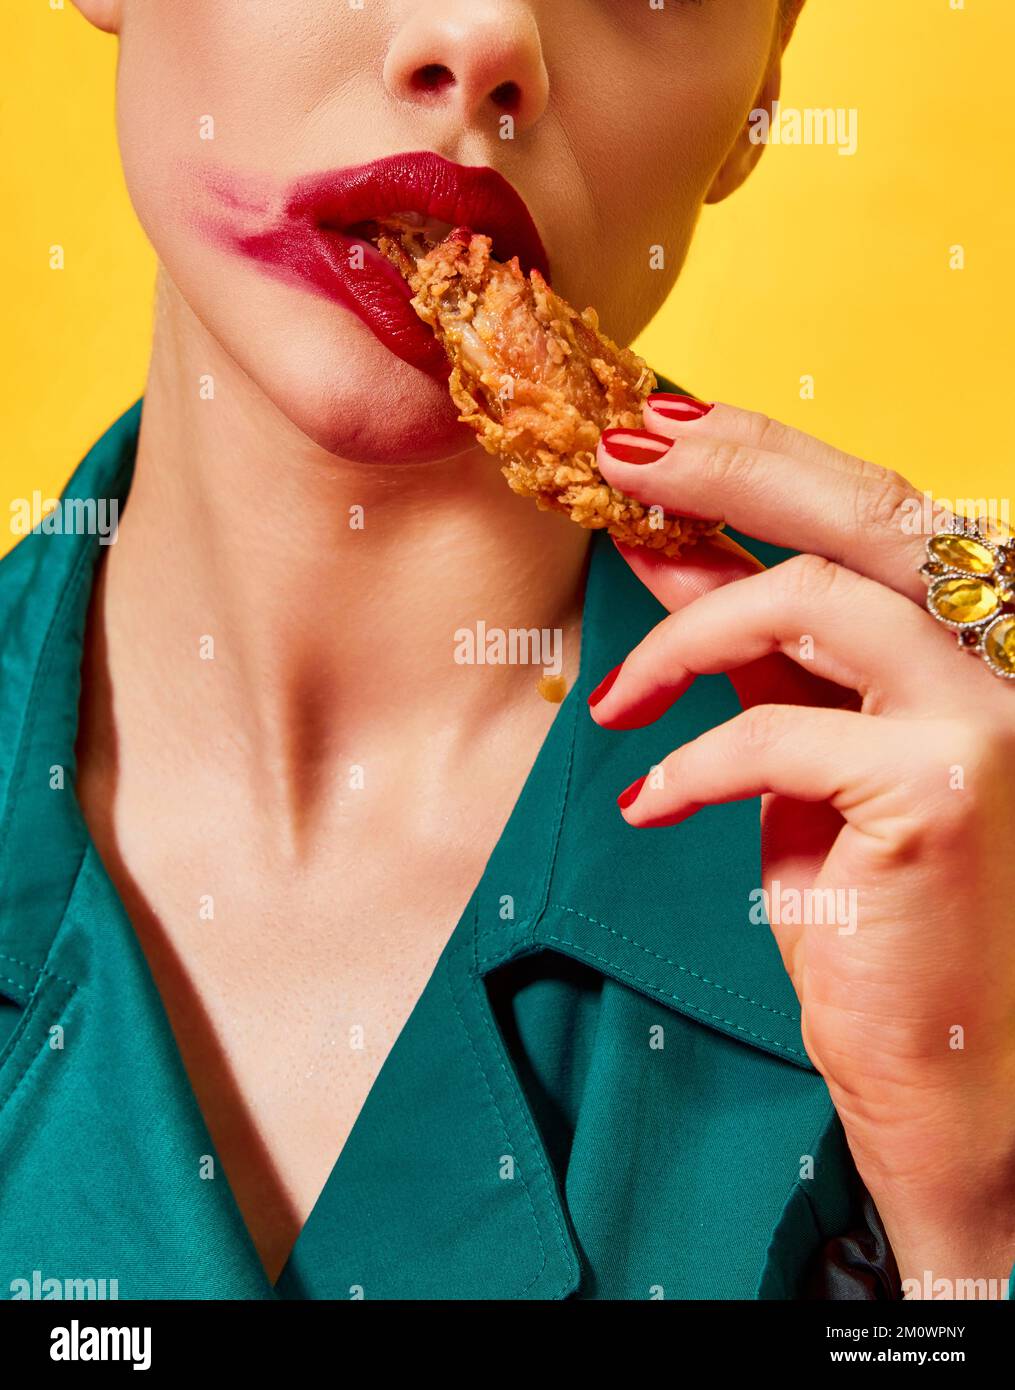 Cropped image of woman in green coat with red lipstick smudge, eating fried chicken, nuggets over yellow background. Fast food. Food pop art Stock Photo